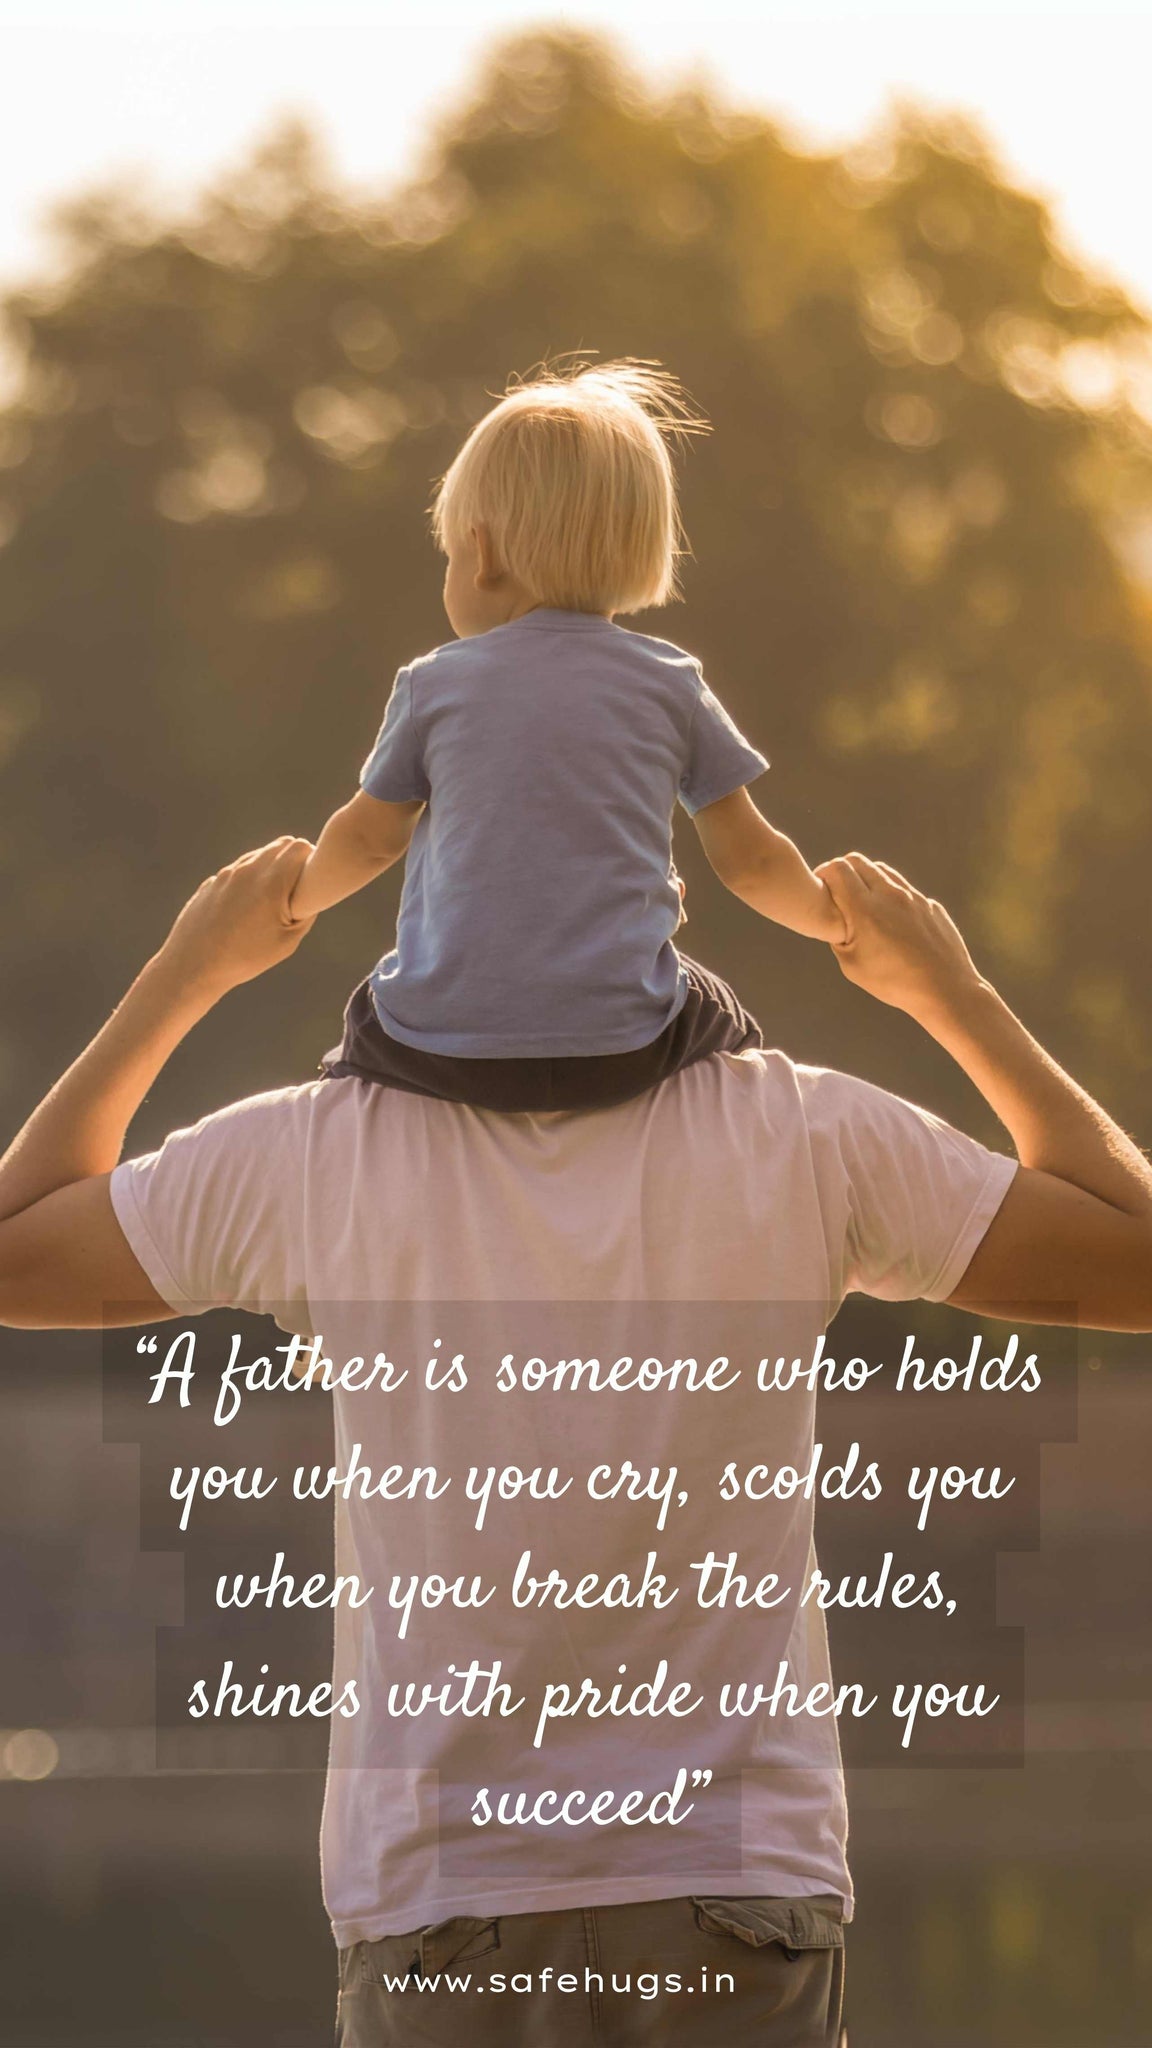 Quote: 'A father holds you when you cry, scolds you when you break the rules, shines with pride when you succeed.'